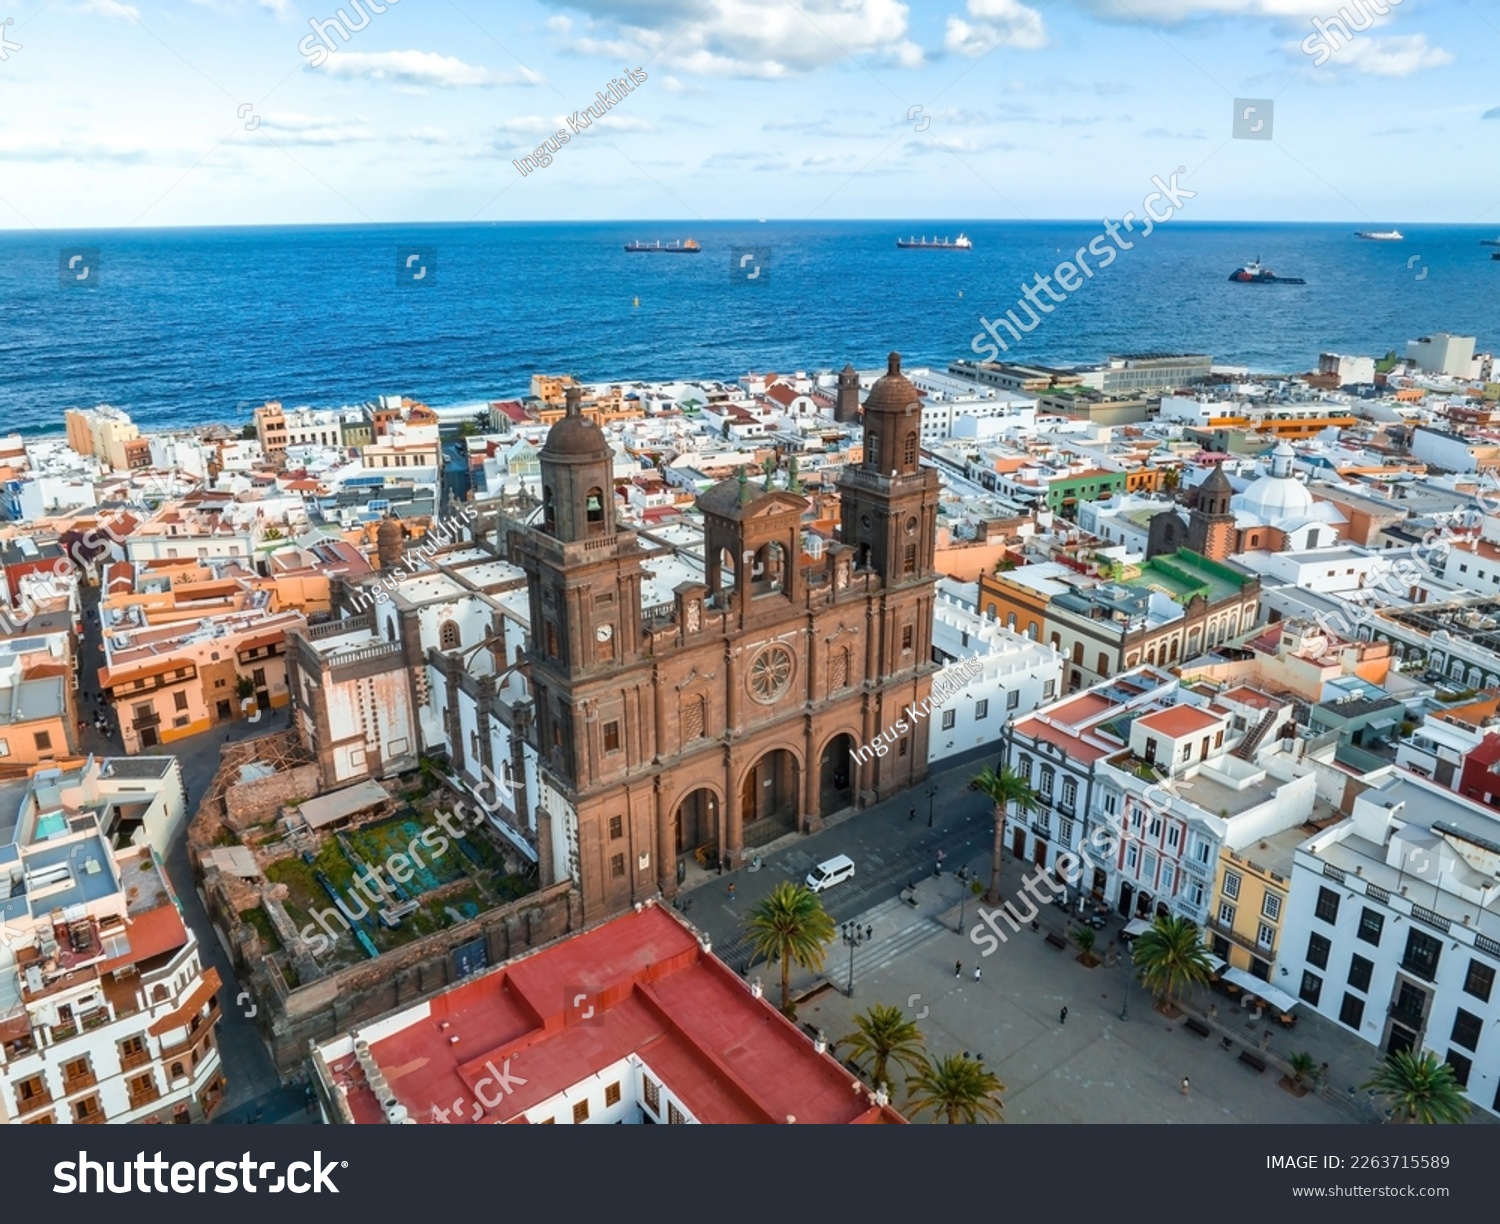 Landscape with Cathedral Santa Ana Vegueta in Las Palmas, Gran Canaria, Canary Islands, Spain. Aerial sunset view of the Las Palmas city. #2263715589